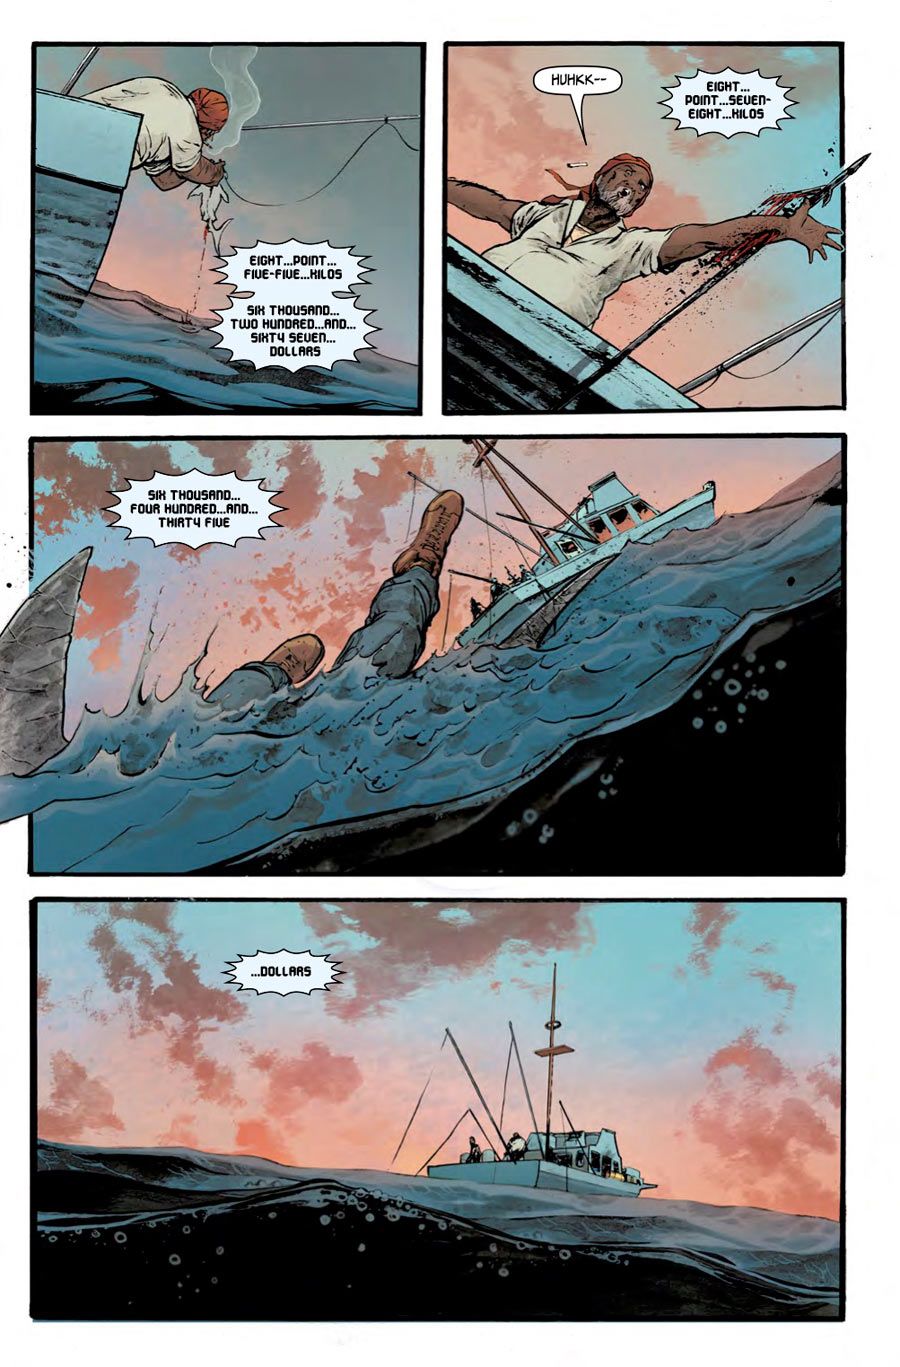 hook_jaw_2_preview-2